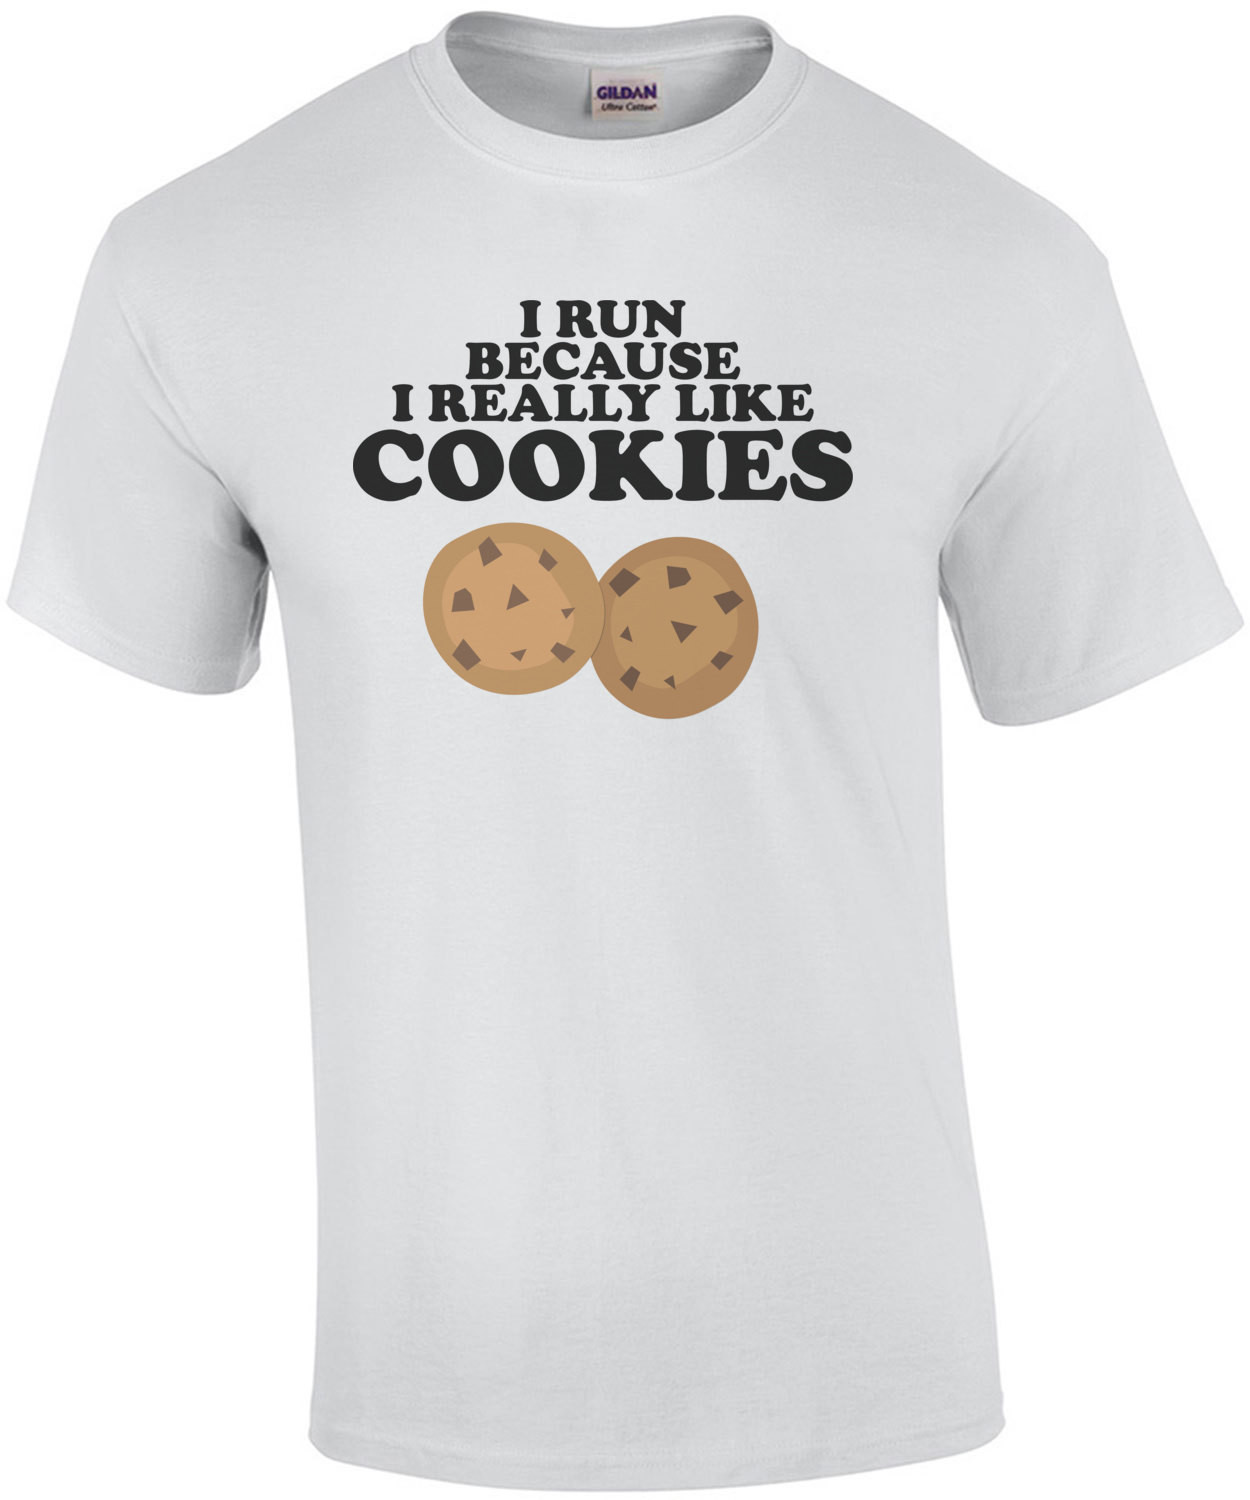 I run because I really like cookies - funny exercise